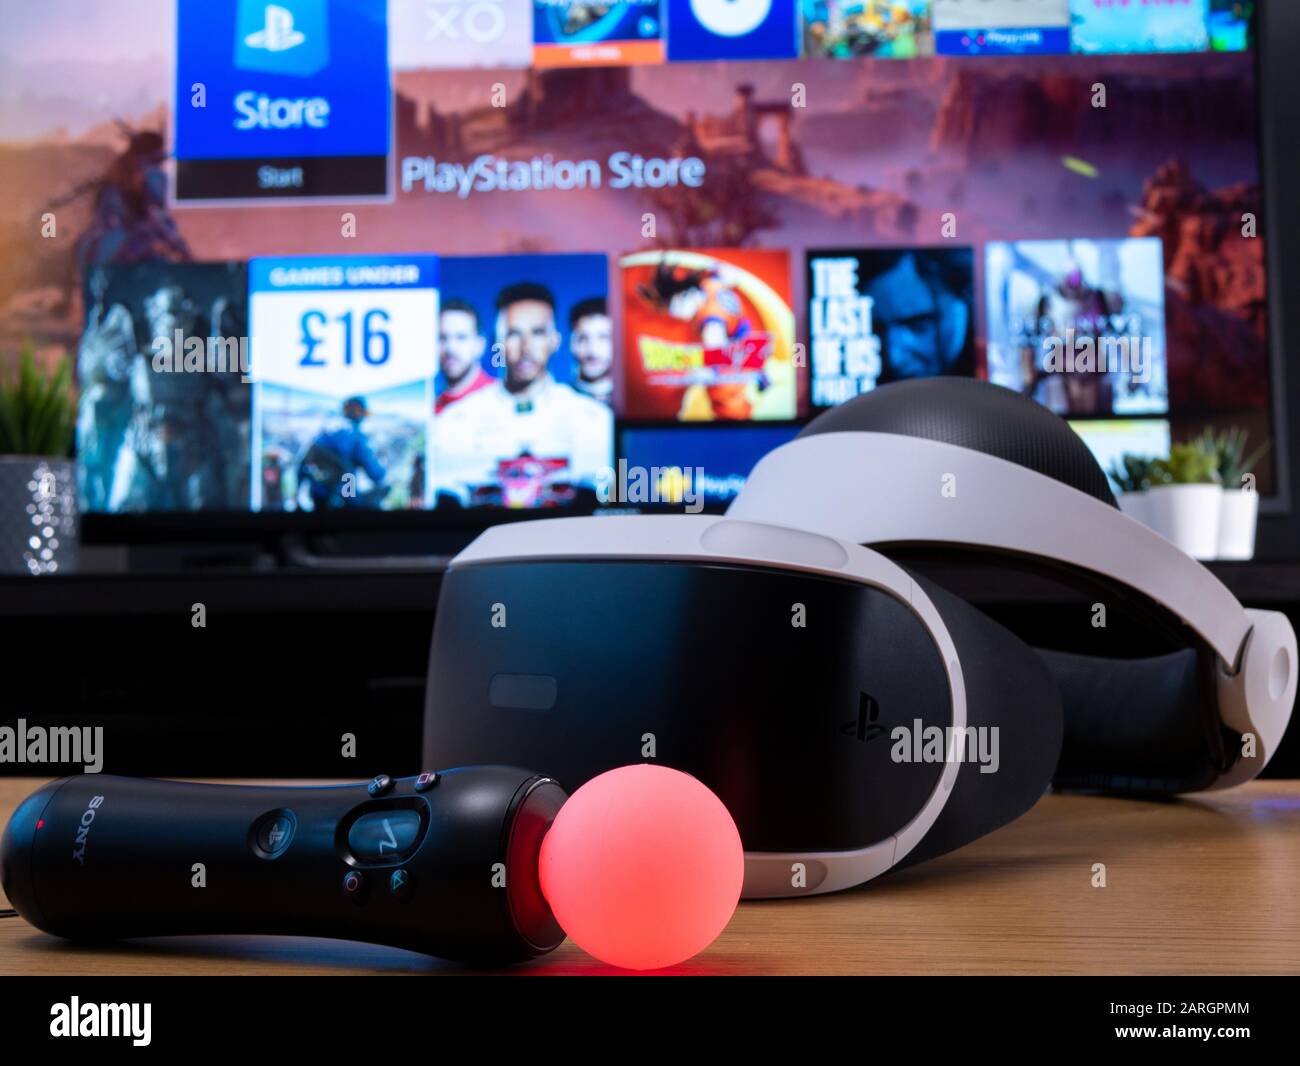 playstation move controller uk